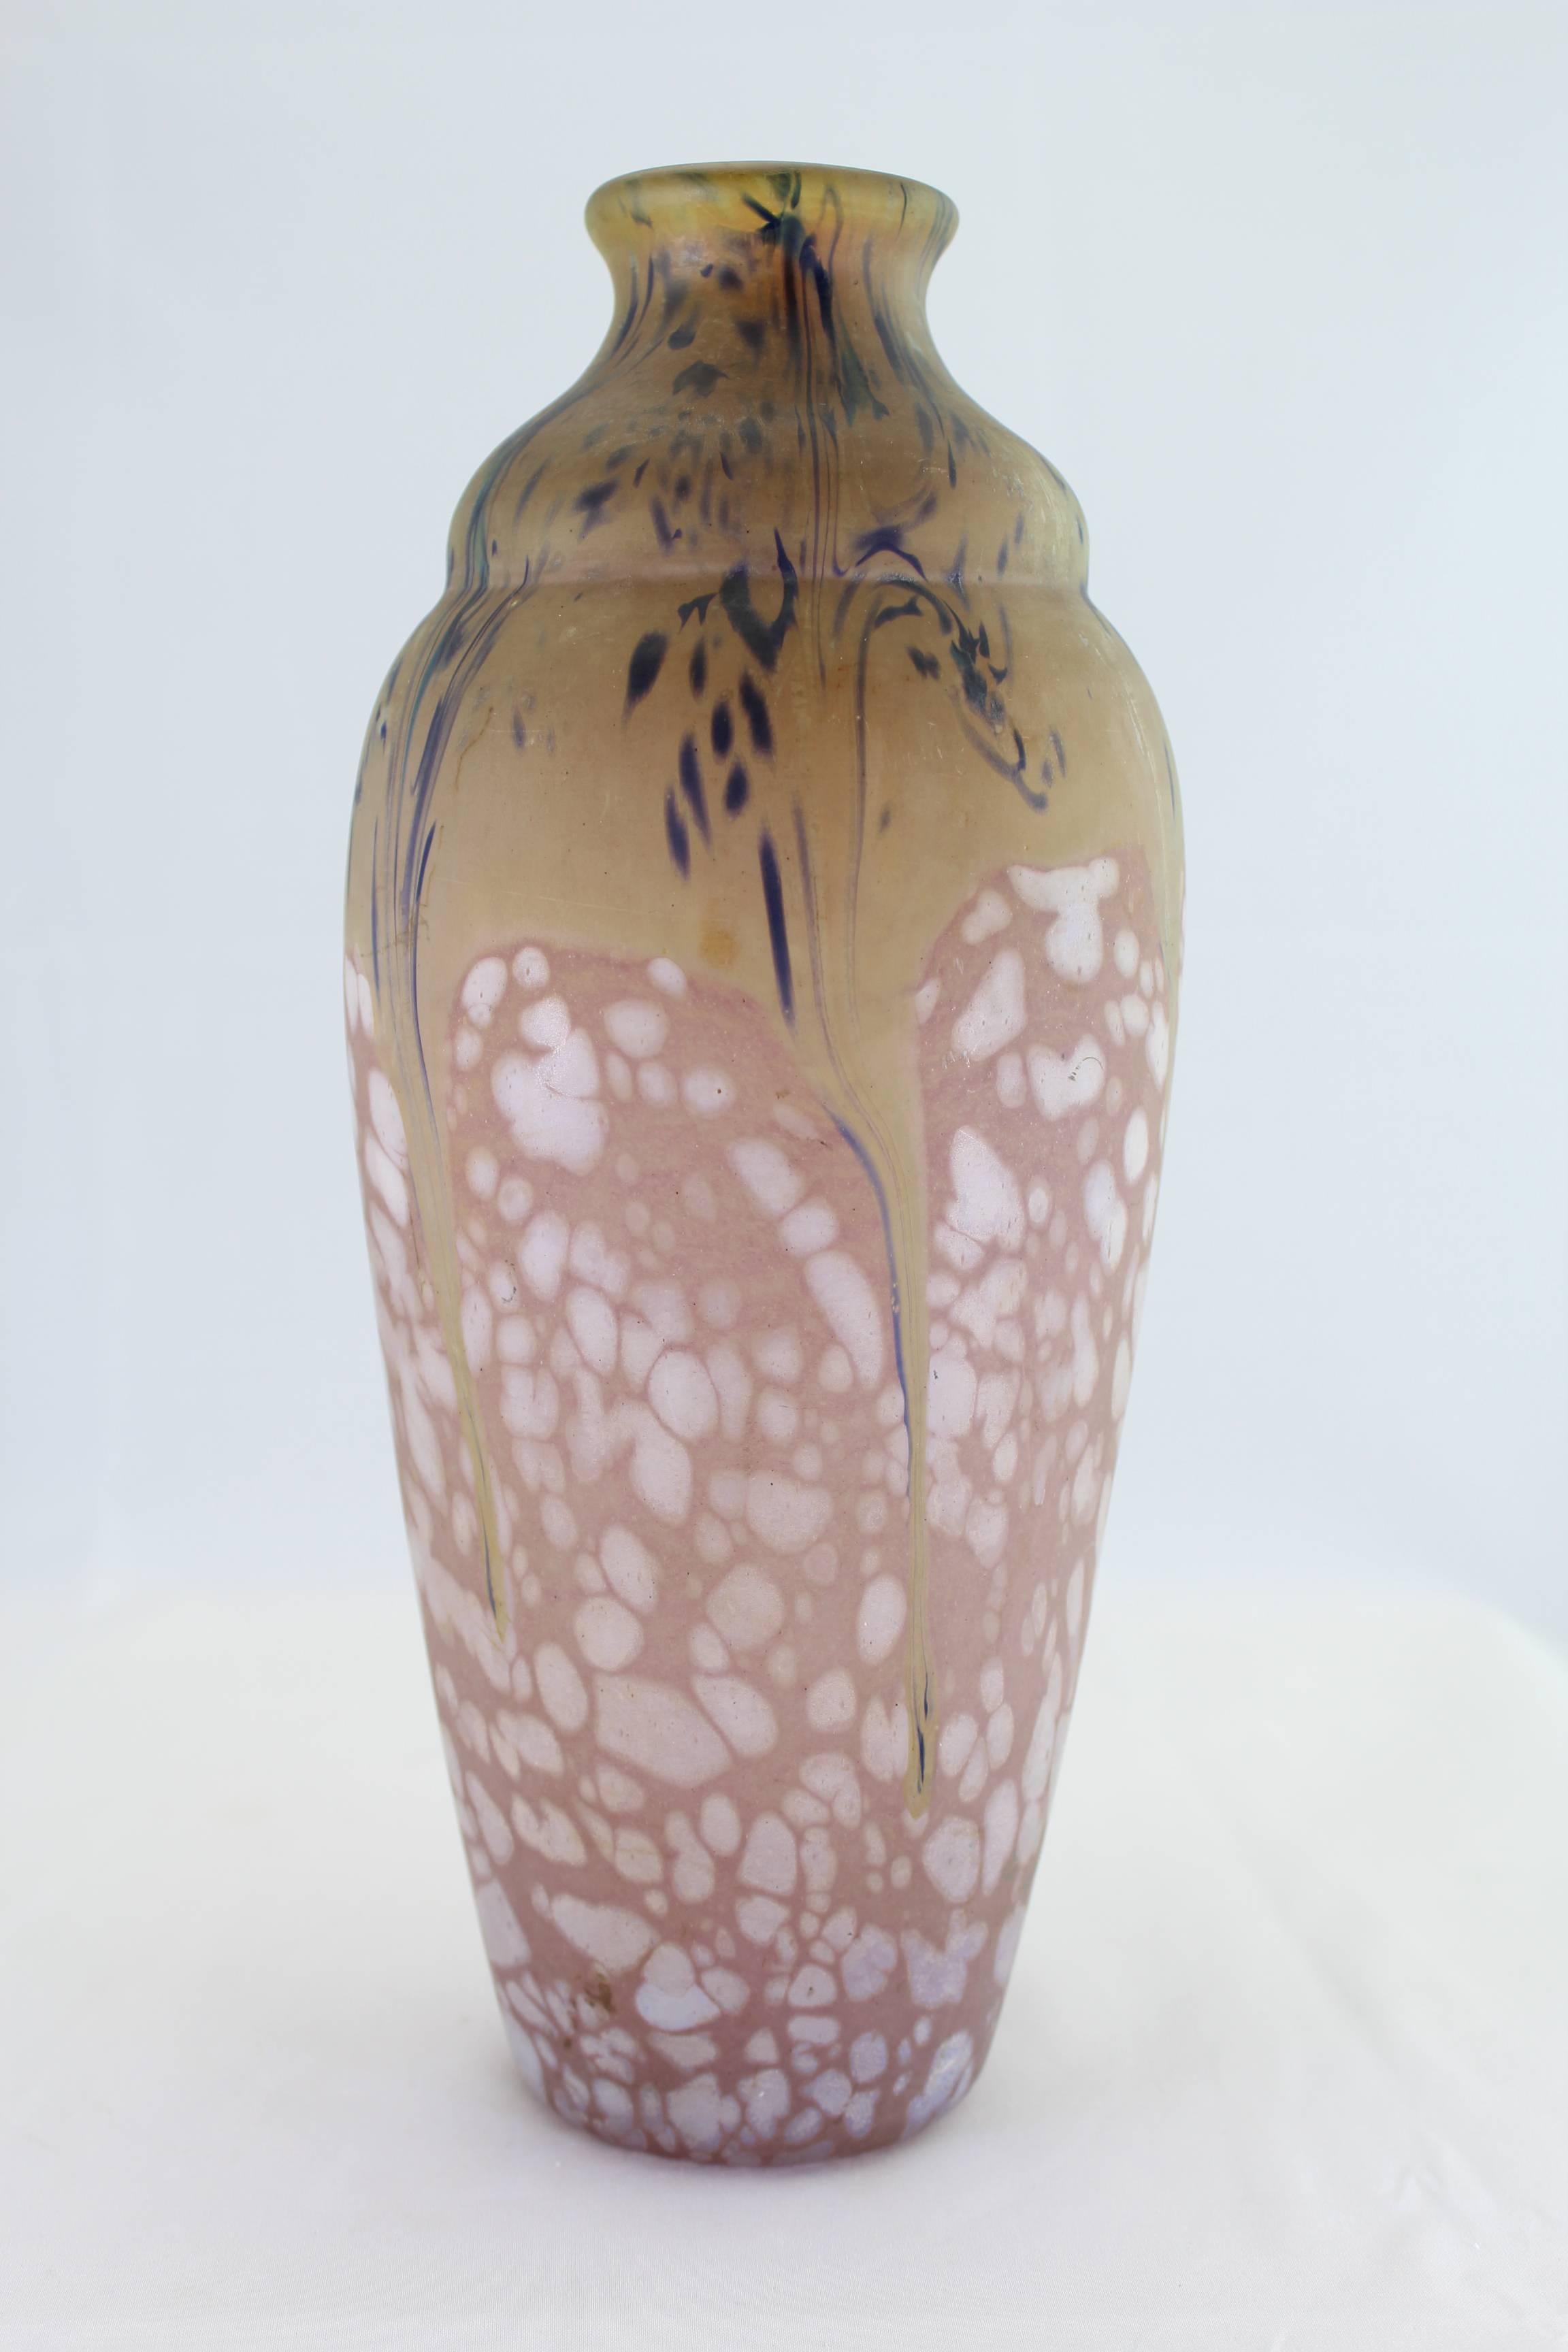 Rare and beautiful Art Deco variegated vase by Daum Nancy circa 1920. Almost 11 inches tall and pristine ready to display. This particular vase shows wild colors and designs when lighted from behind.

Signed: Daum Nancy with double cross or